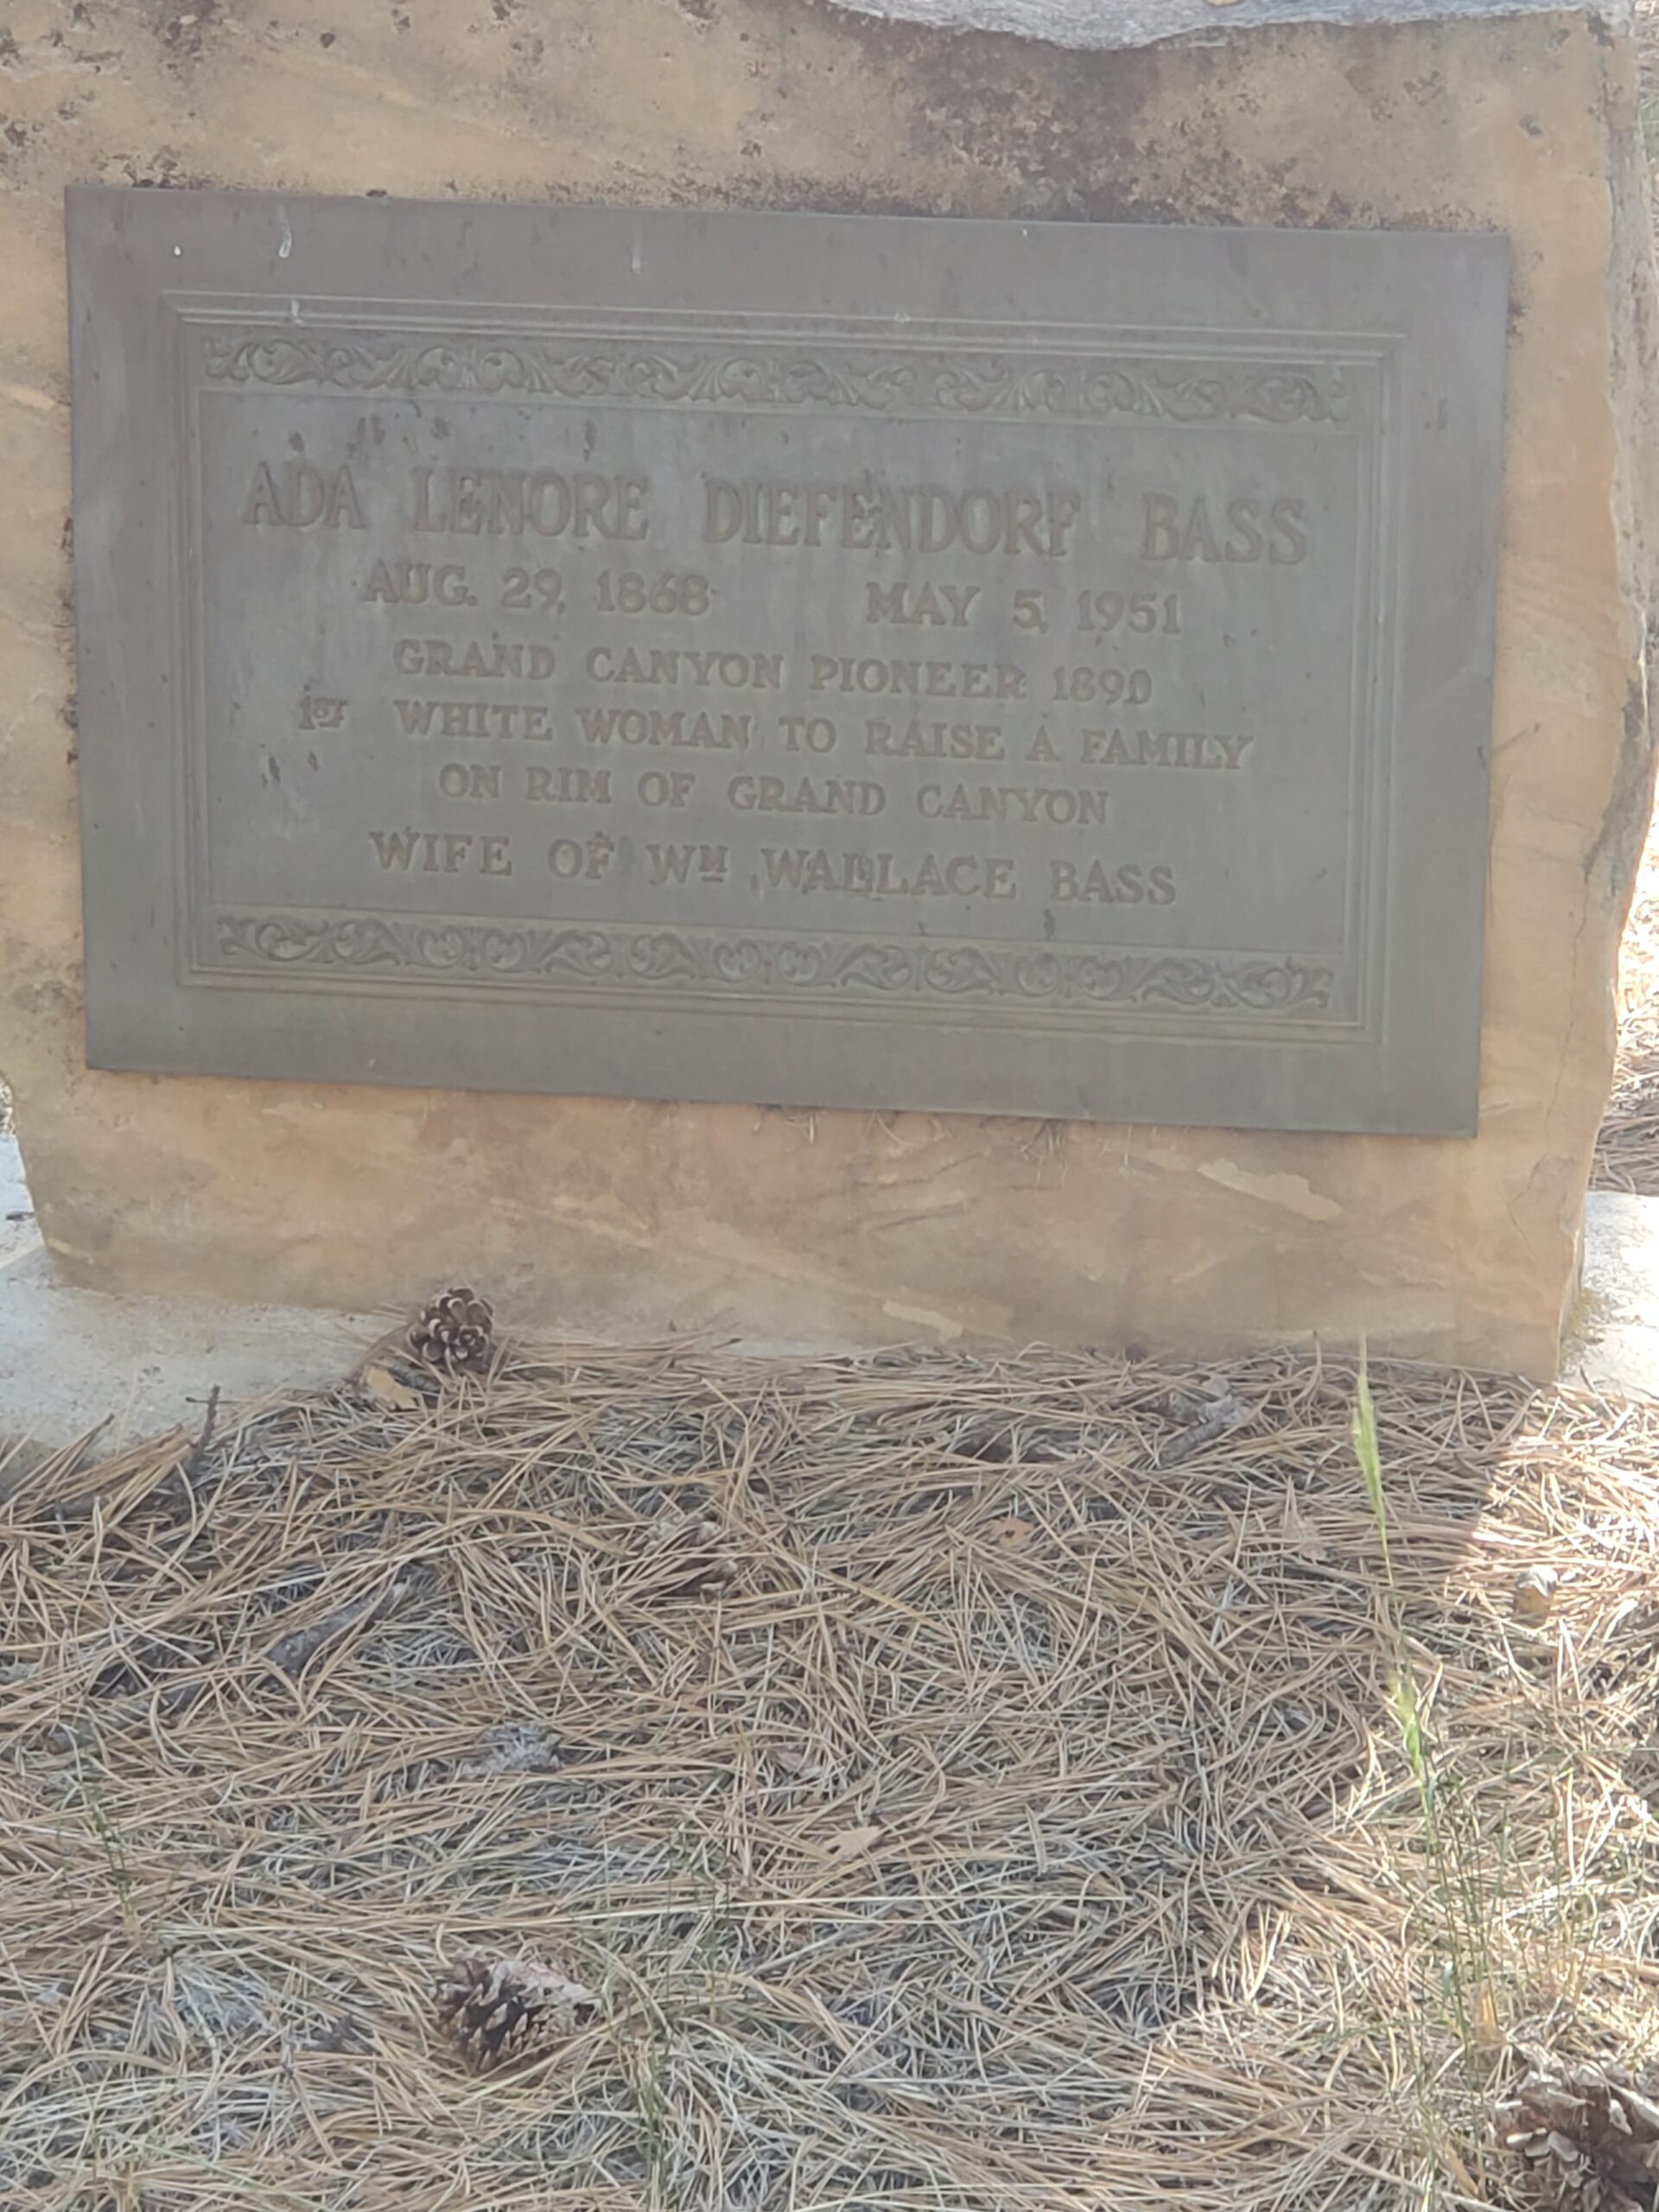 Ada's headstone claims she was the first white woman to raise a family on the canyon's rims